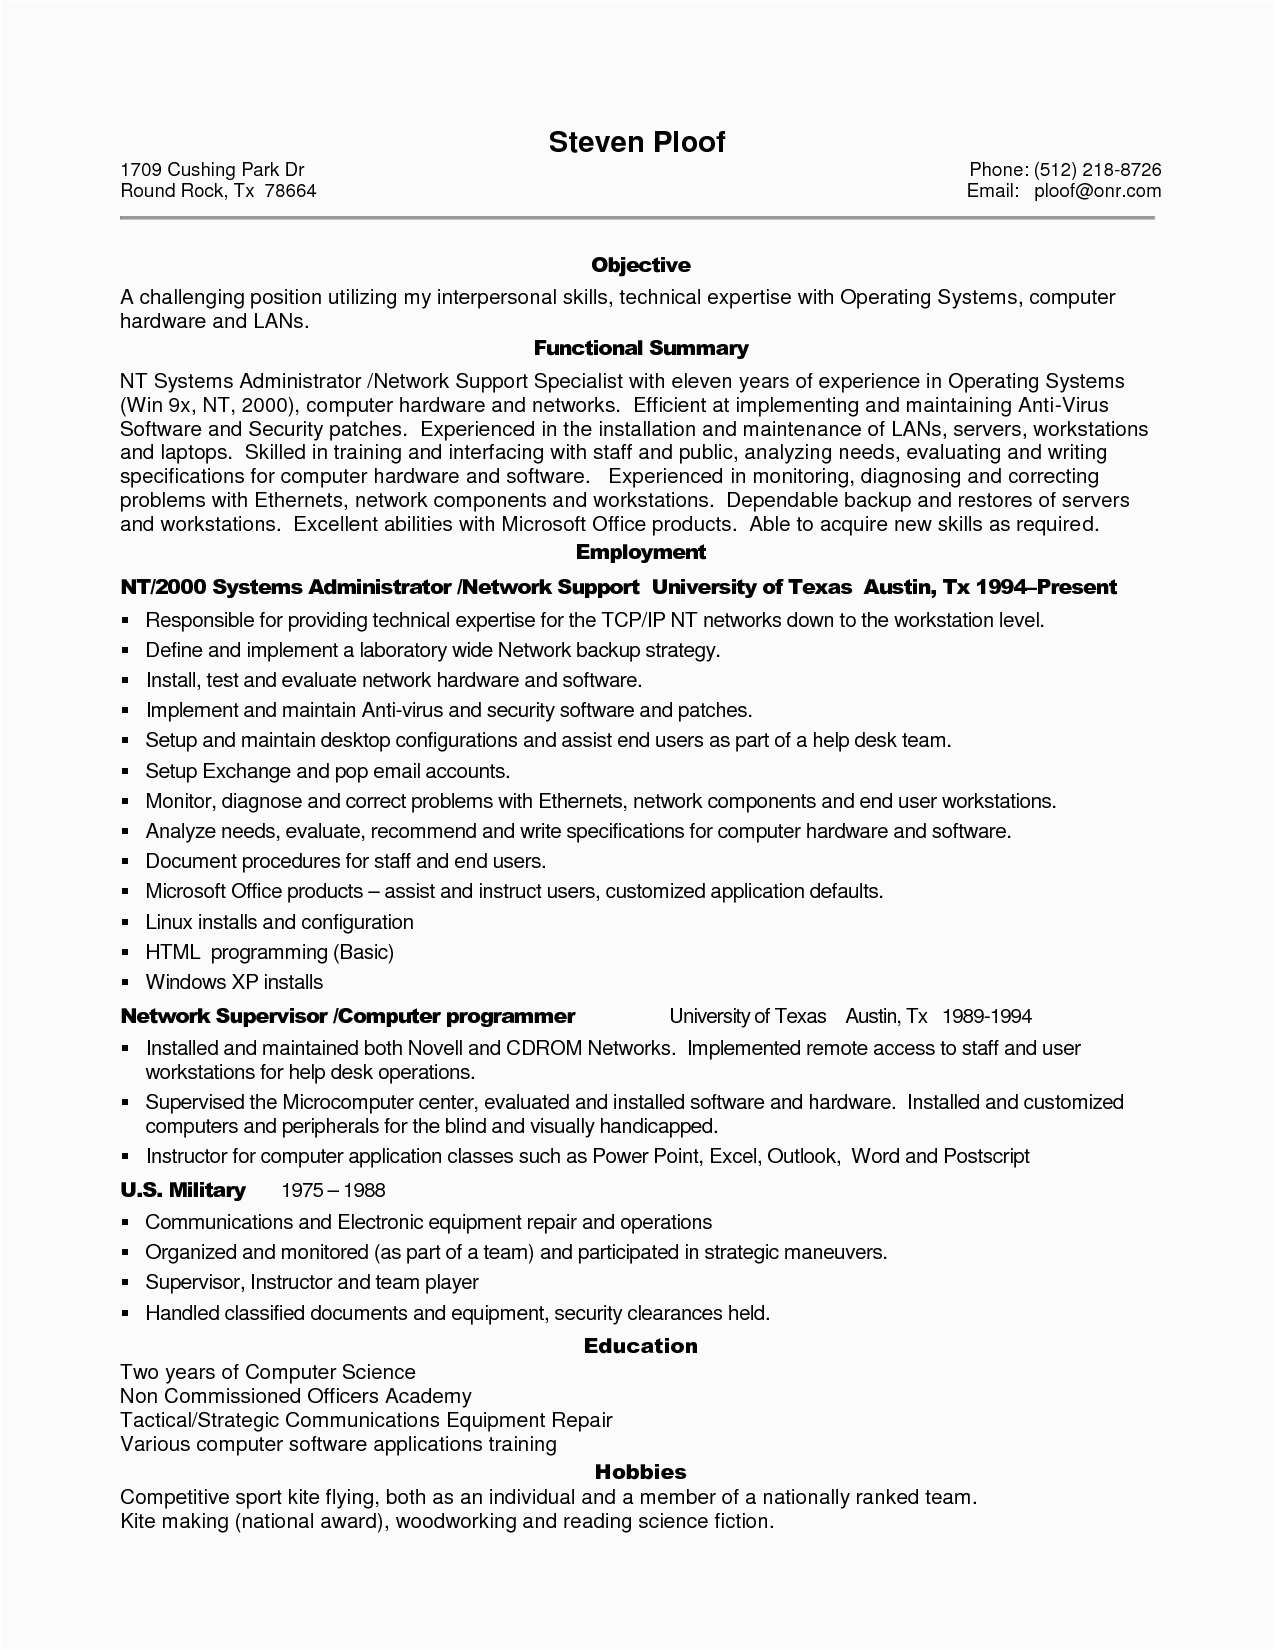 resume format 10 years experience